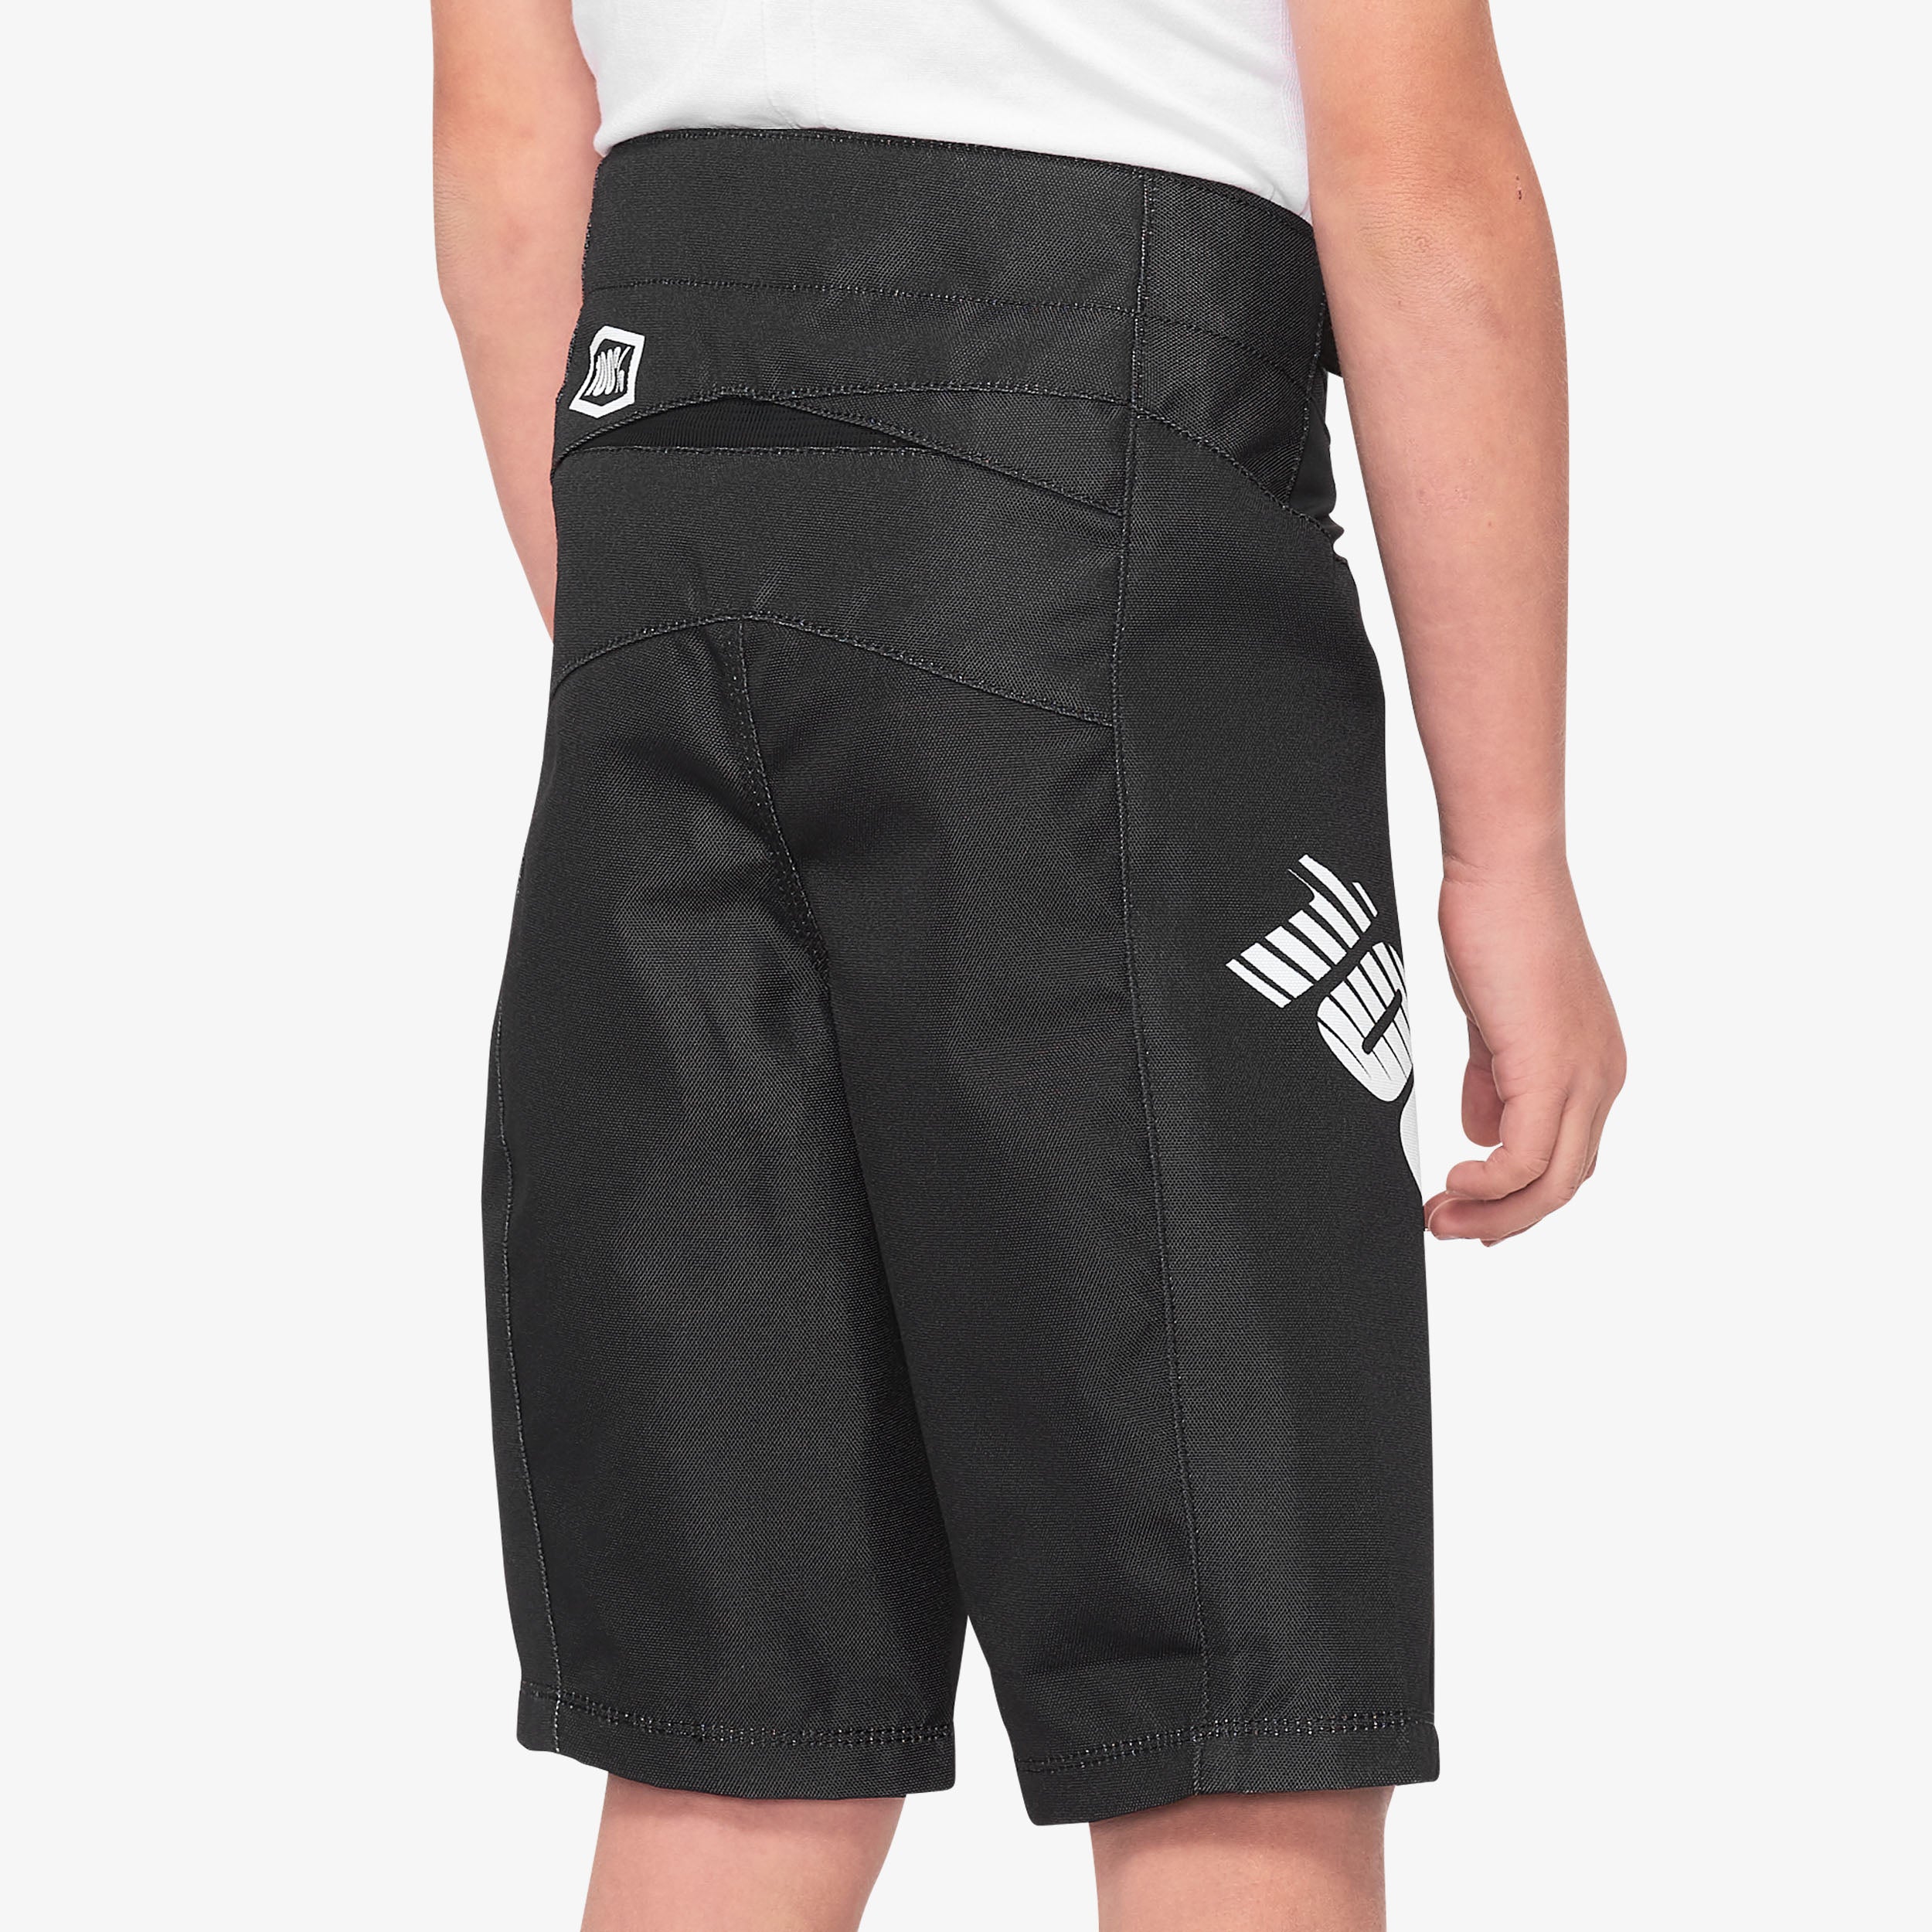 R-CORE DH Shorts - Black - Youth - Secondary